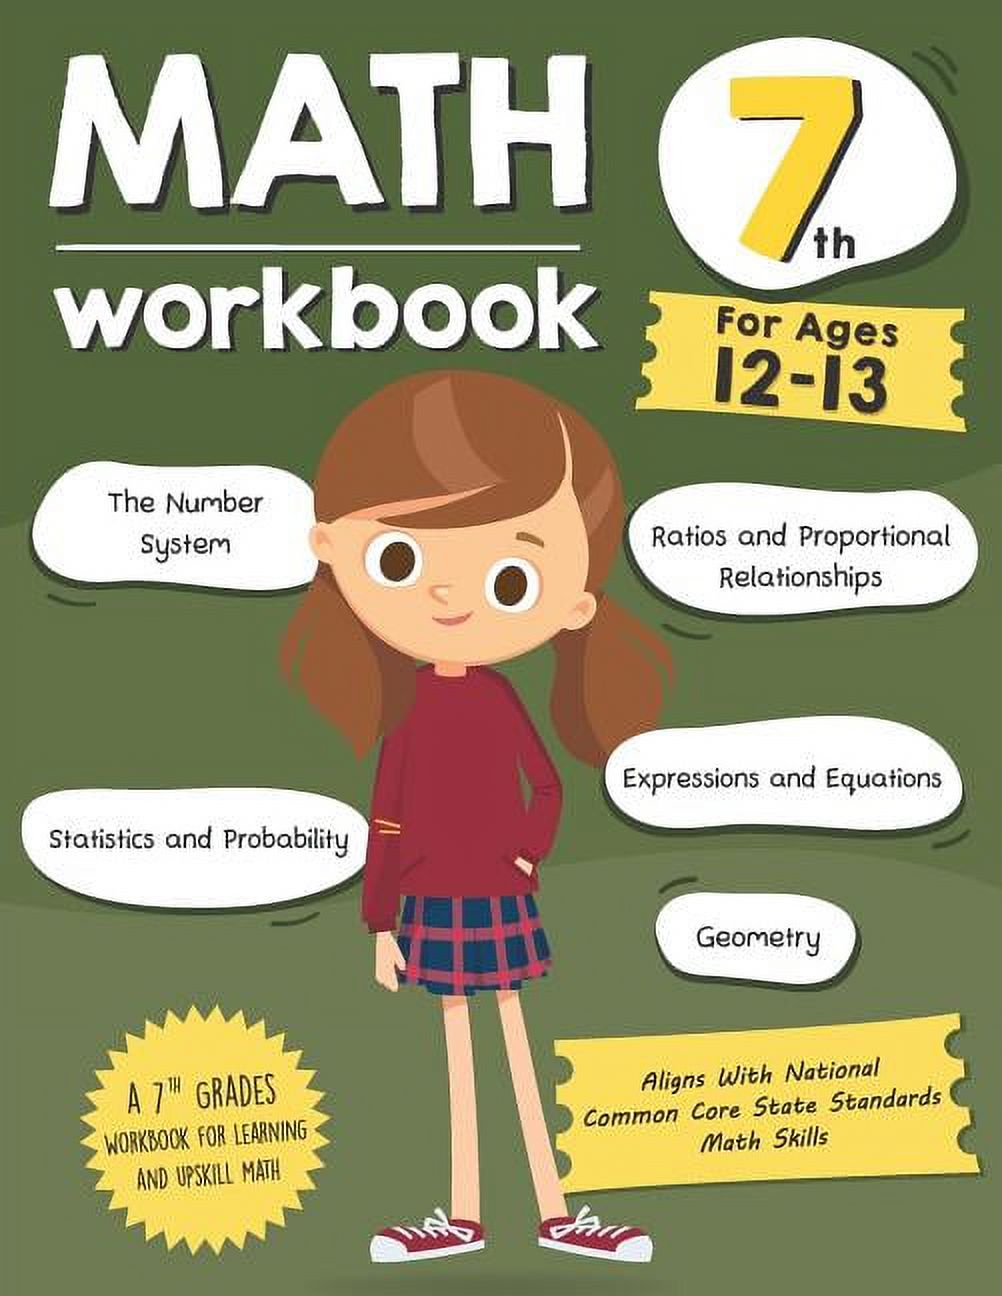 Math Workbook Grade 7 (Ages 12-13): A 7th Grade Math Workbook For Learning Aligns With National Common Core Math Skills, (Paperback) - image 1 of 1